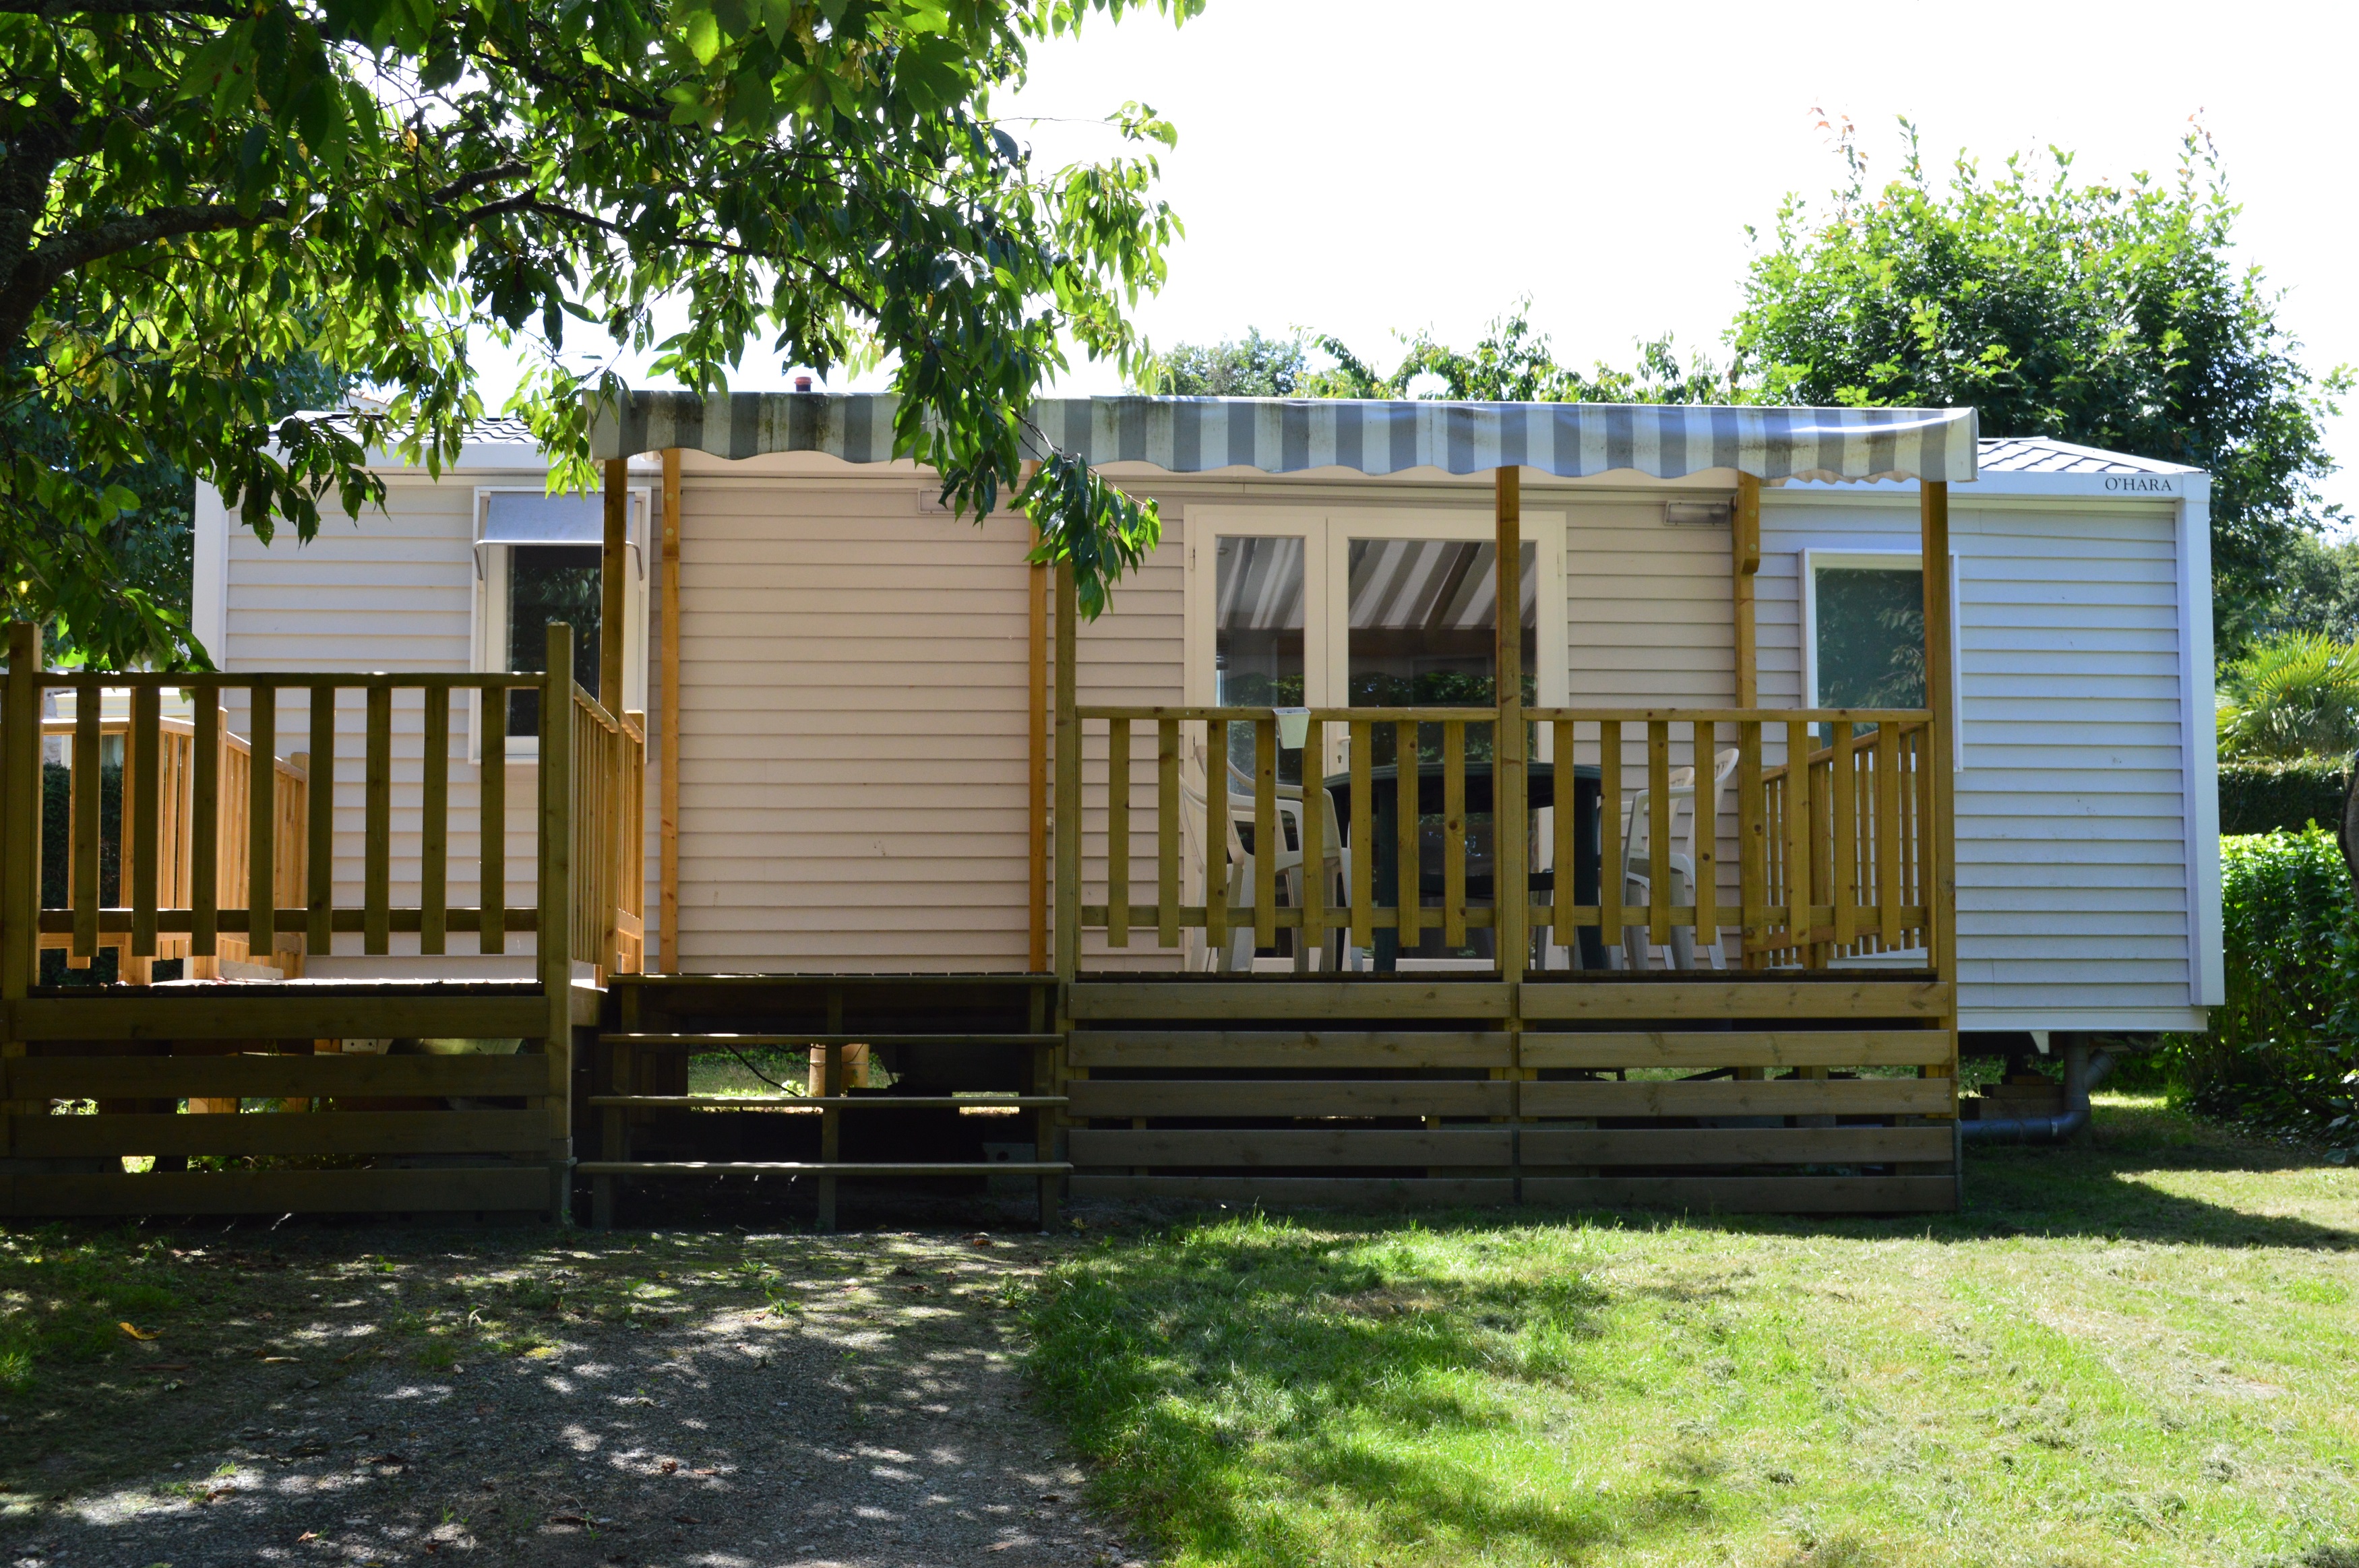 Accommodation - Mobil Home Premium 2 Bedrooms + Sheltered Terrace (Adapted To The People With Reduced Mobility) - Camping L'Ambois